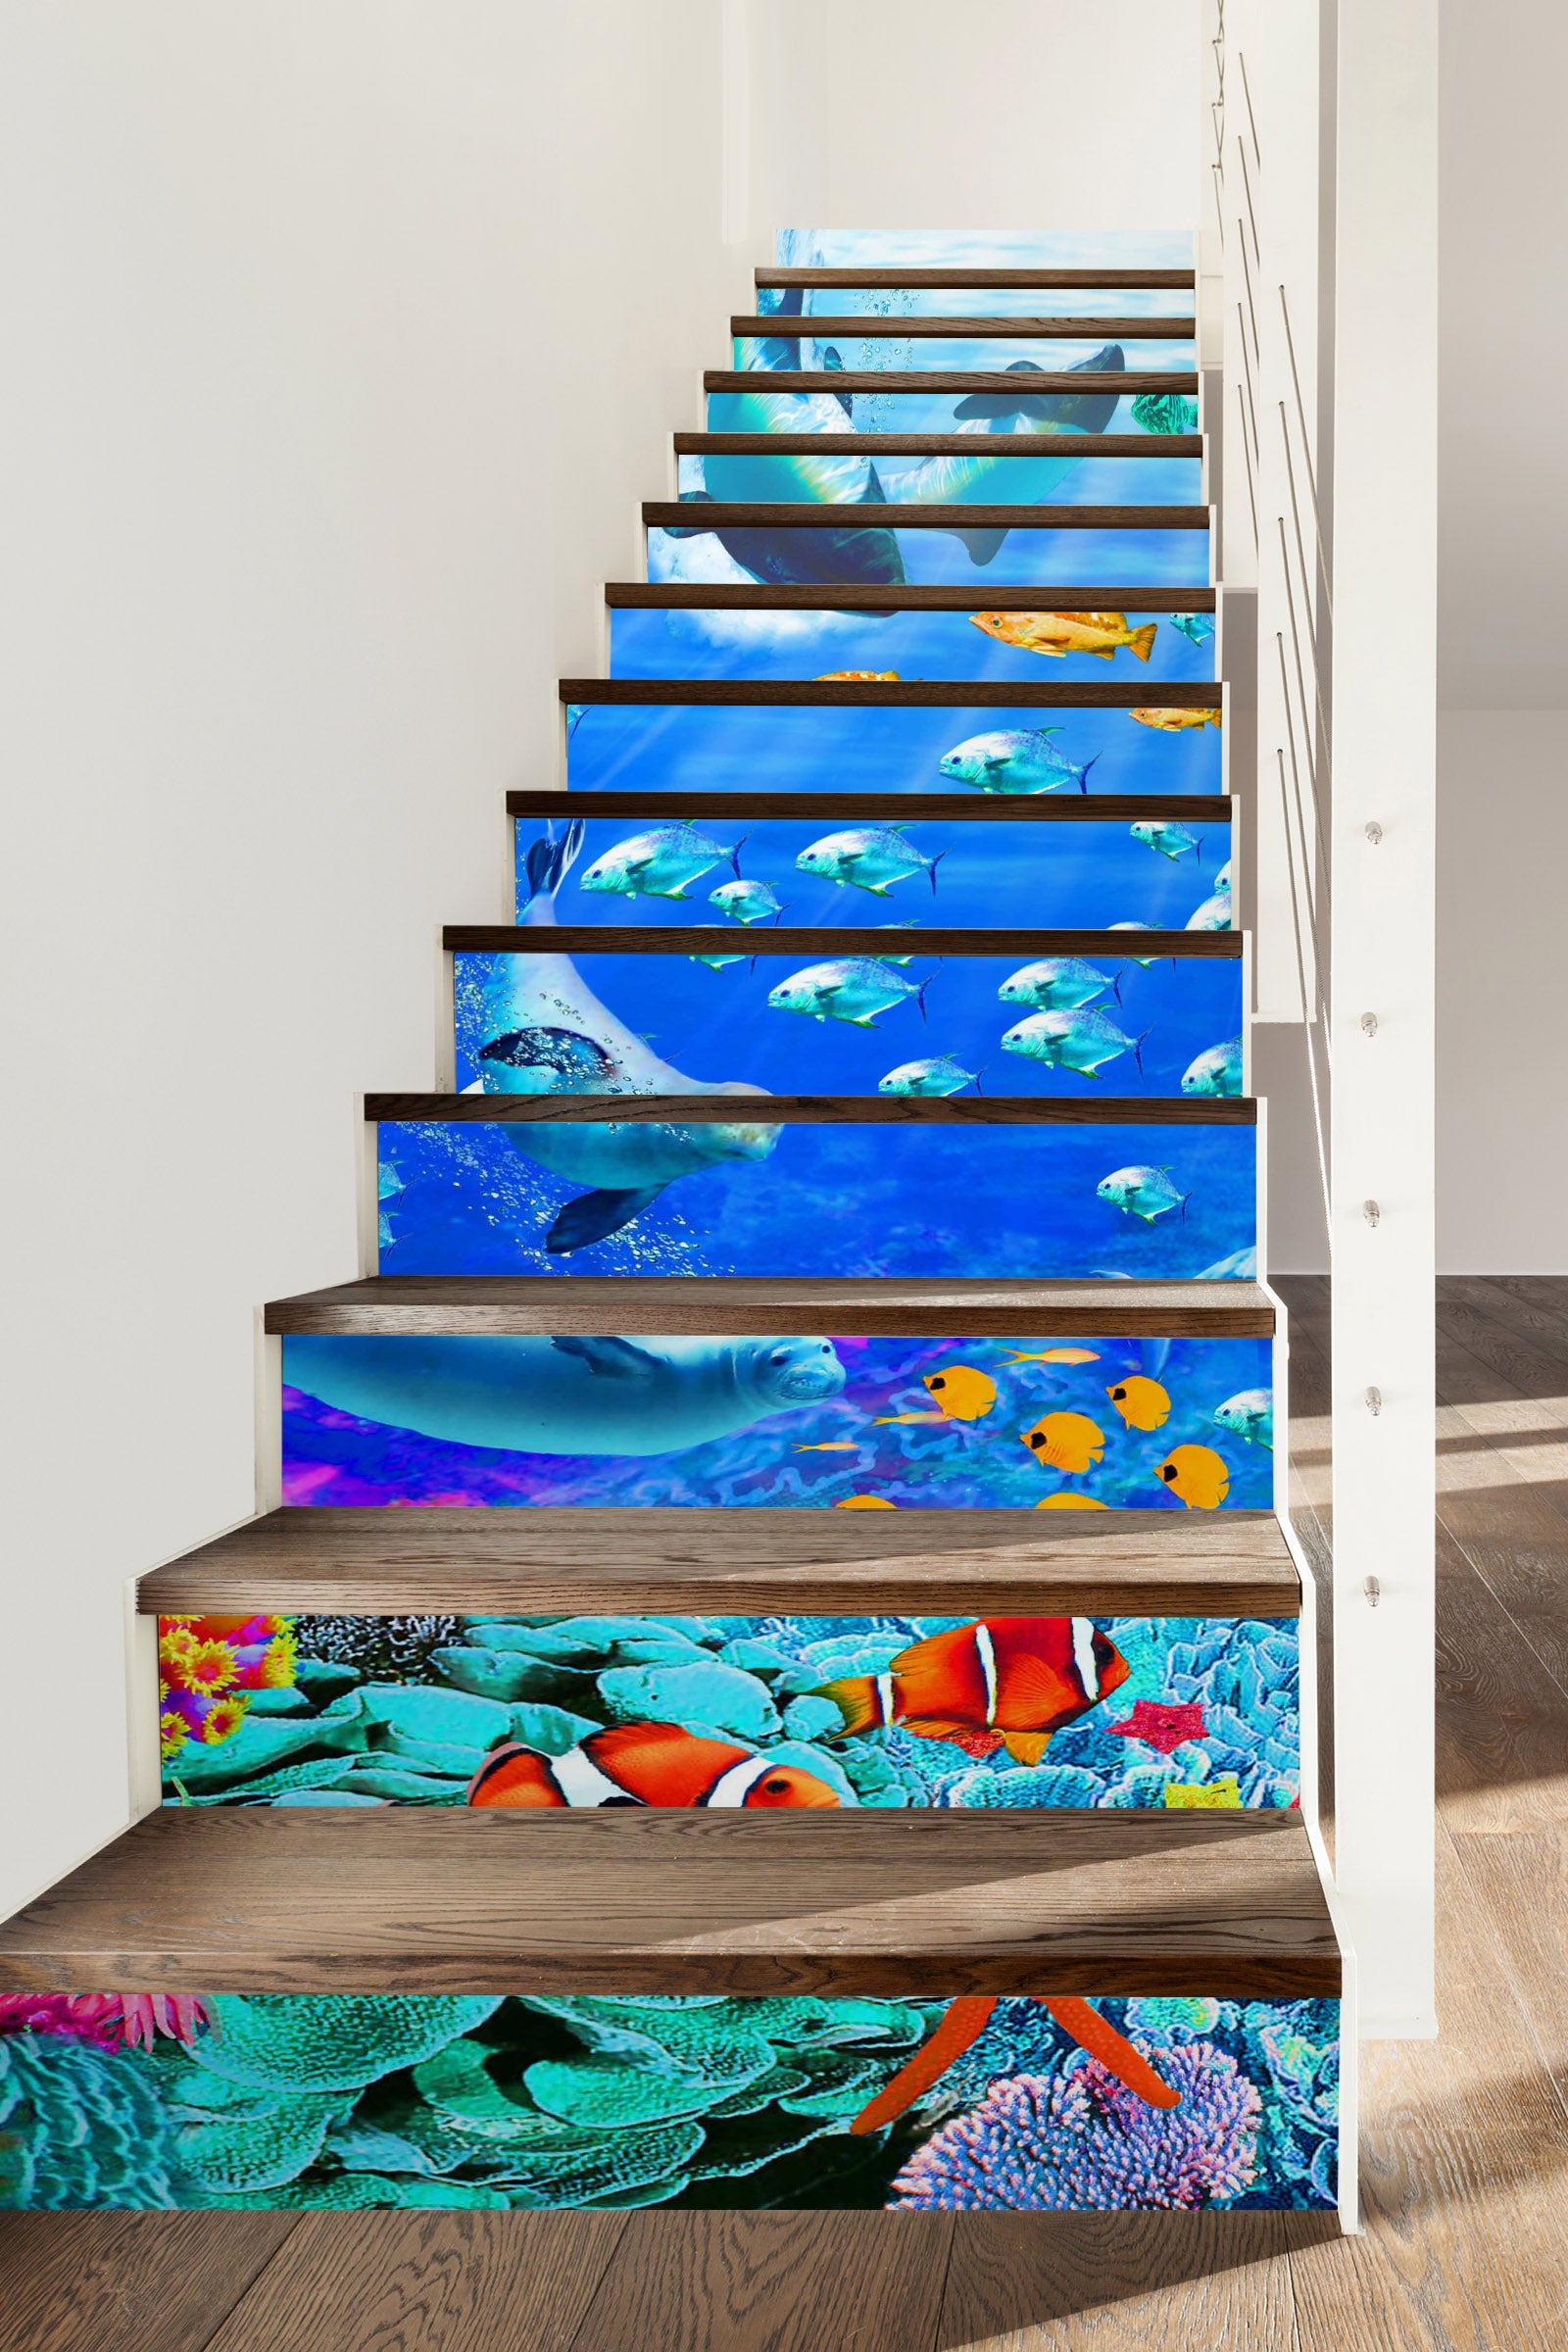 3D Ocean Dolphin Whale Color Fish 96187 Adrian Chesterman Stair Risers